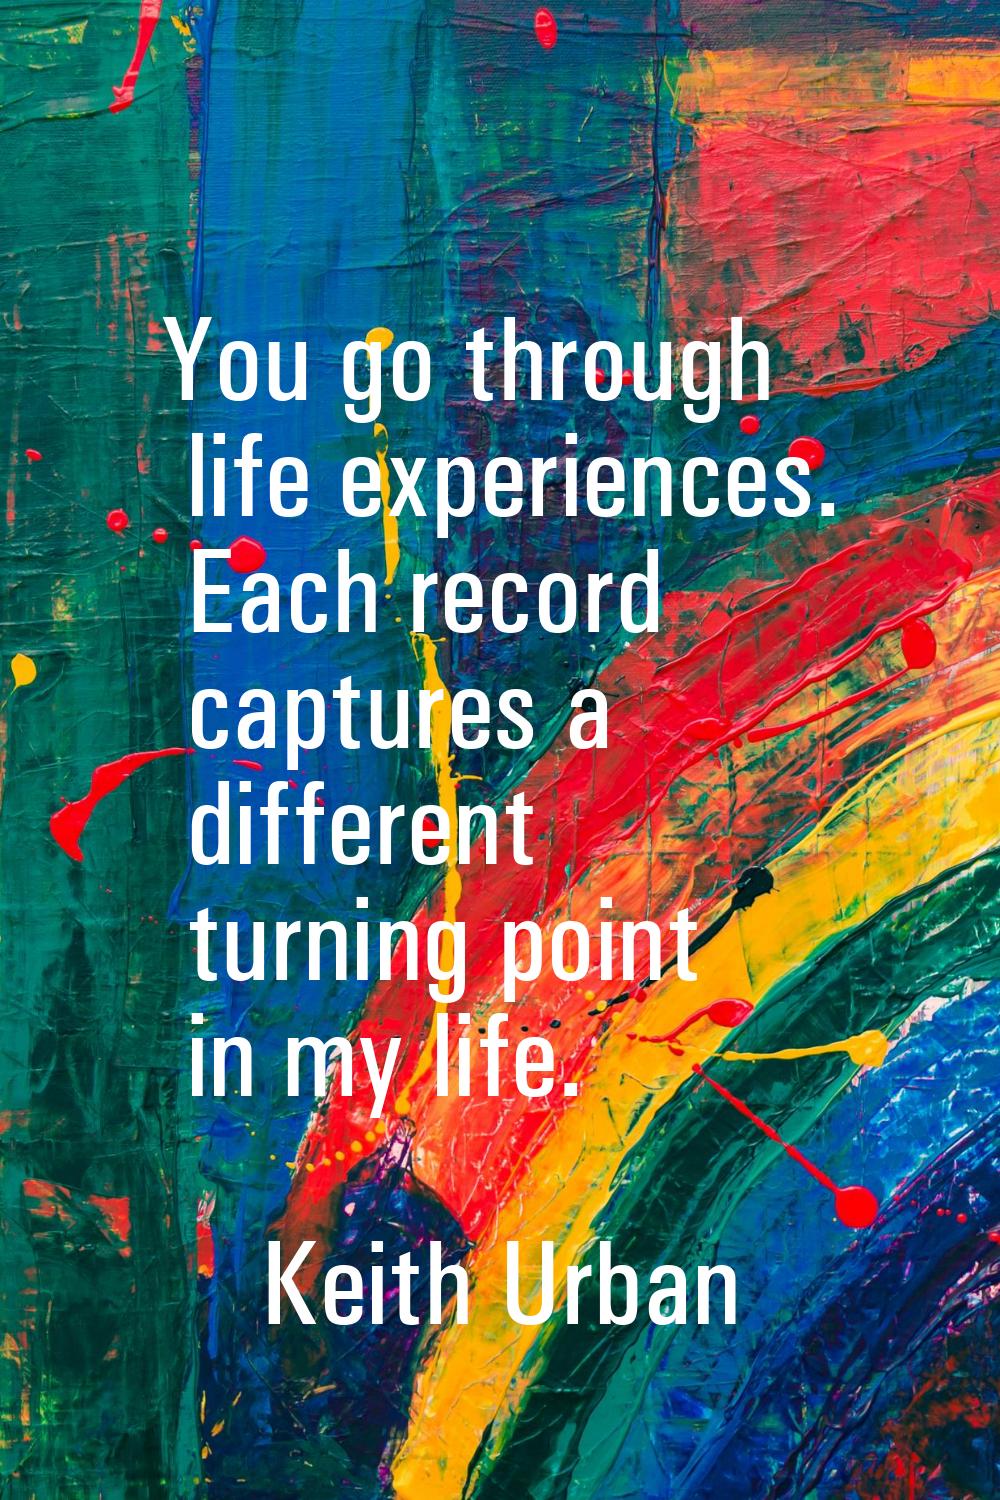 You go through life experiences. Each record captures a different turning point in my life.